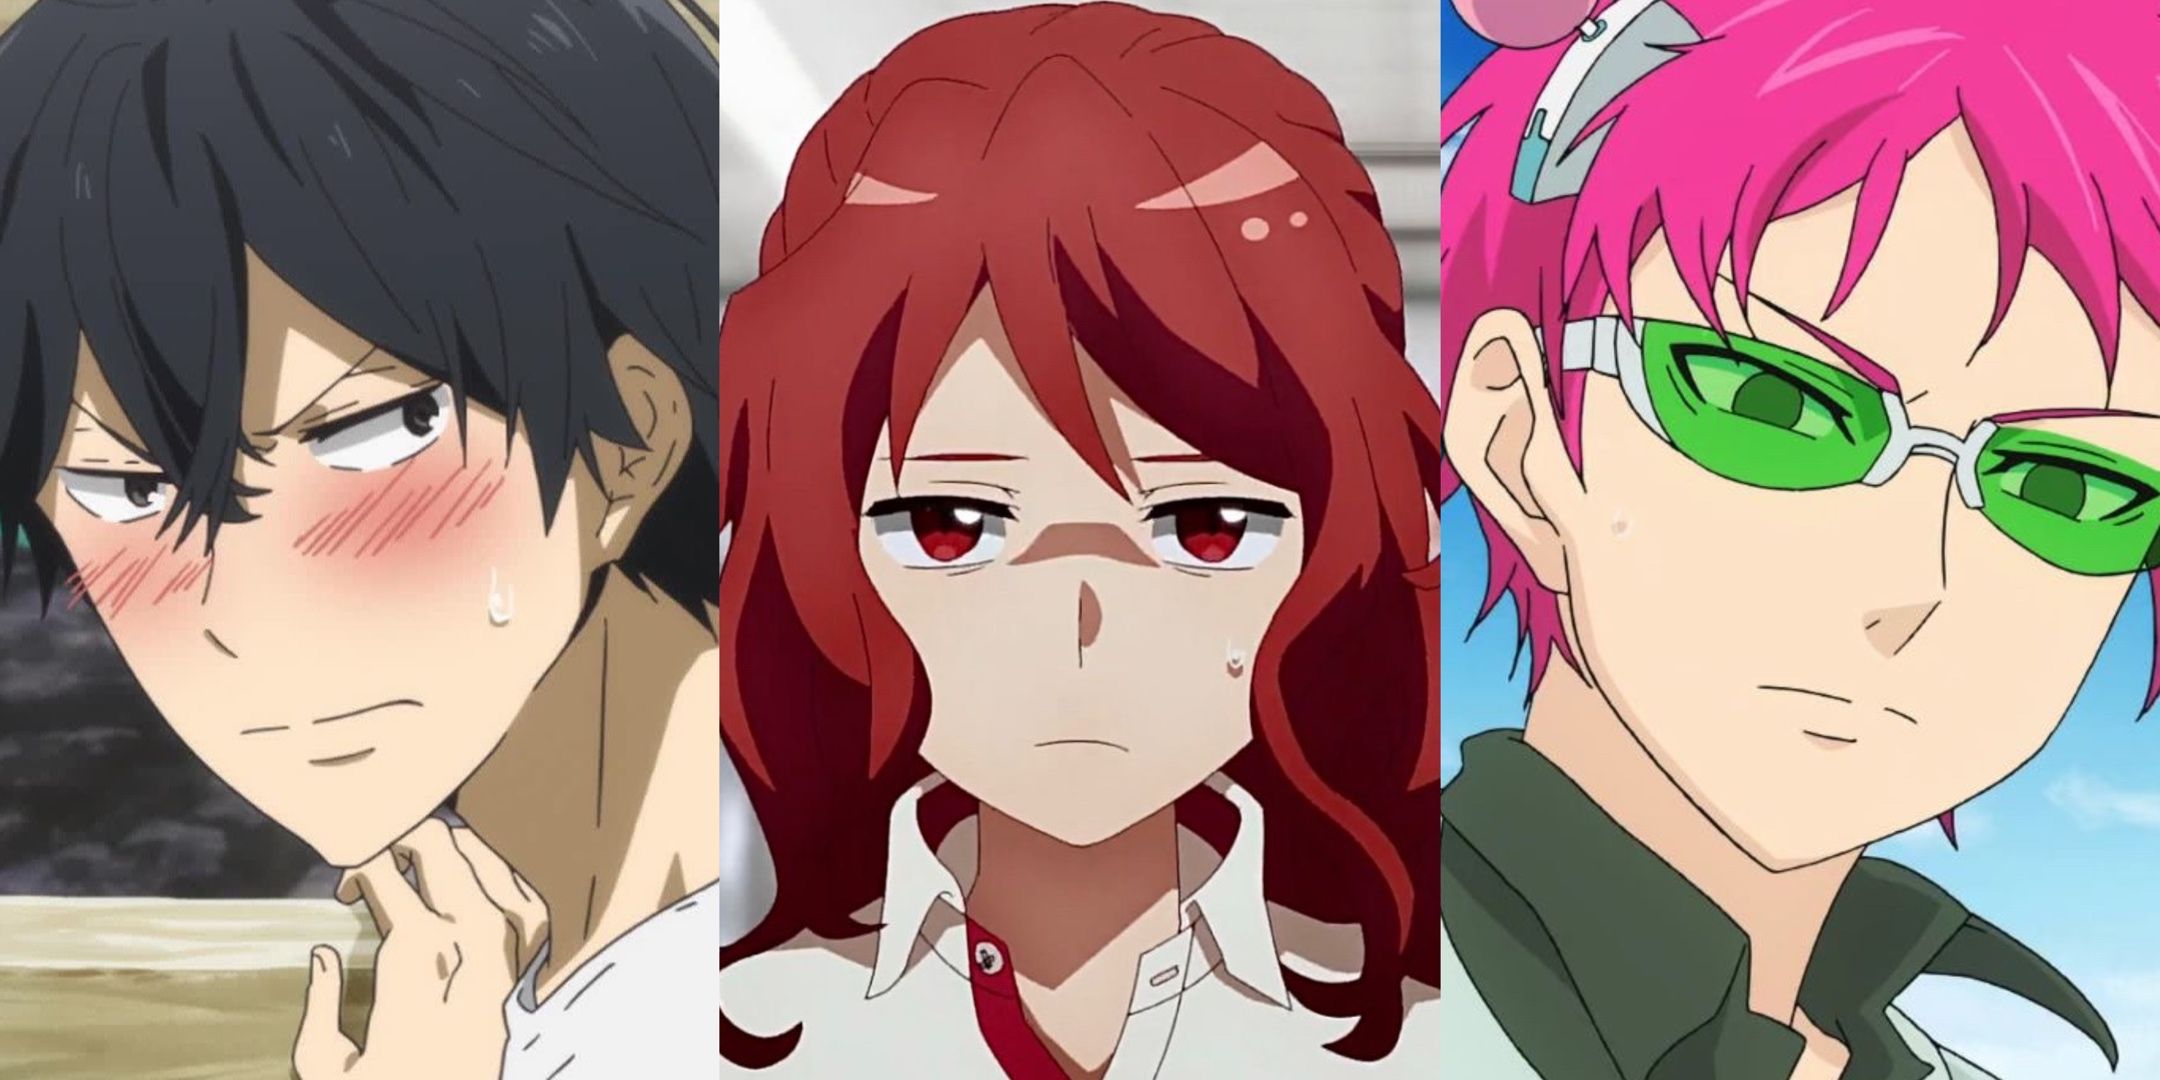 10 Best Anime To Watch After A Bad Breakup